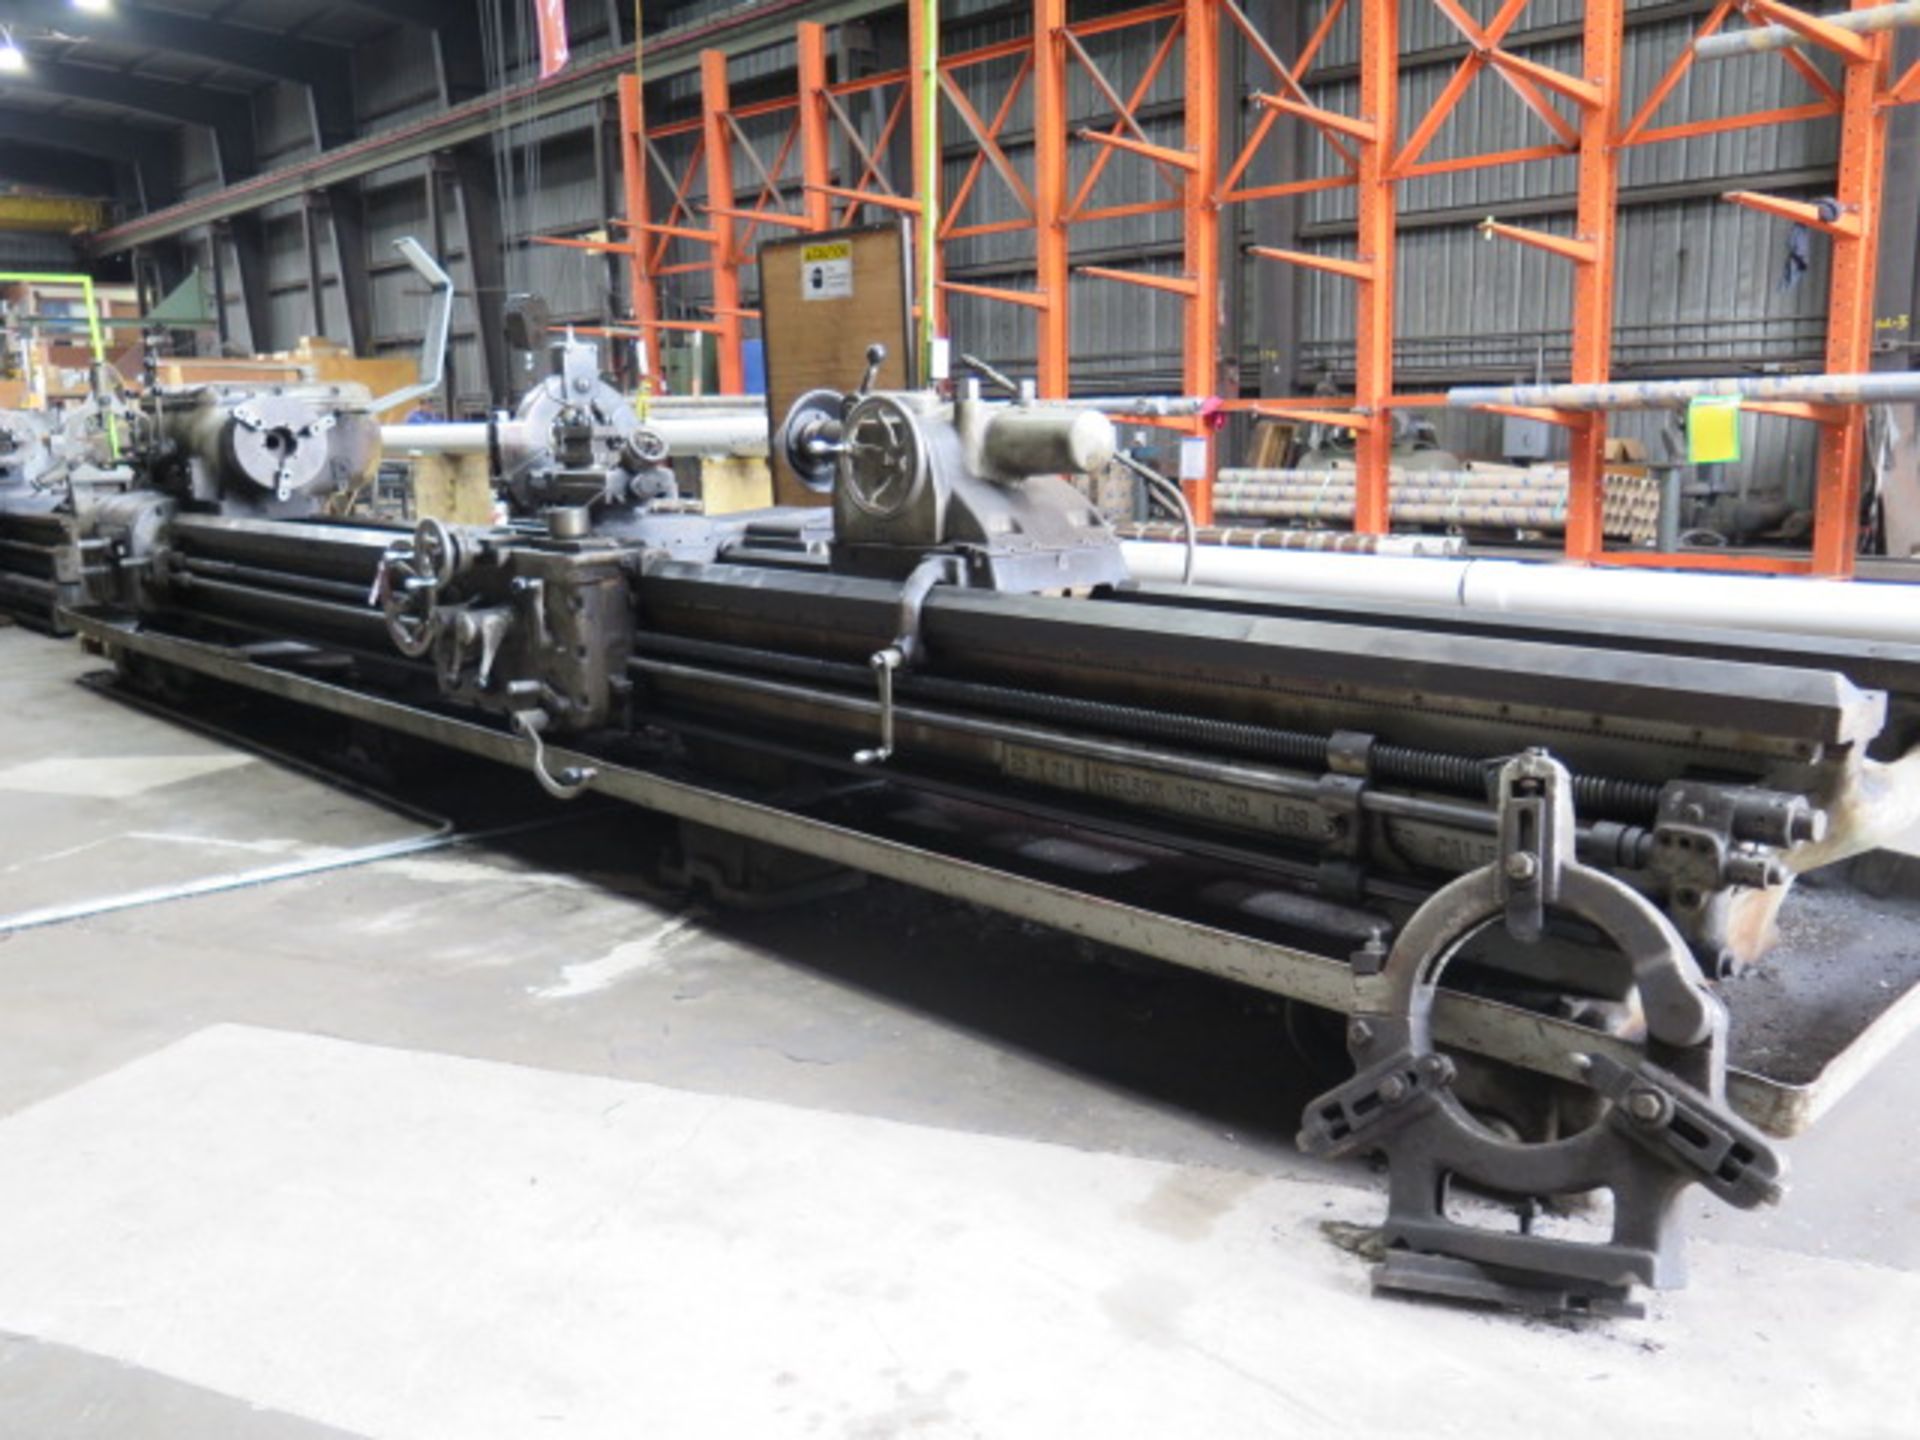 Axelson 25 28” x 216” Geared Head Lathe w/ 24’ Bed, 8-555 RPM,Taper Attachment, Tailstock,SOLD AS IS - Image 3 of 12